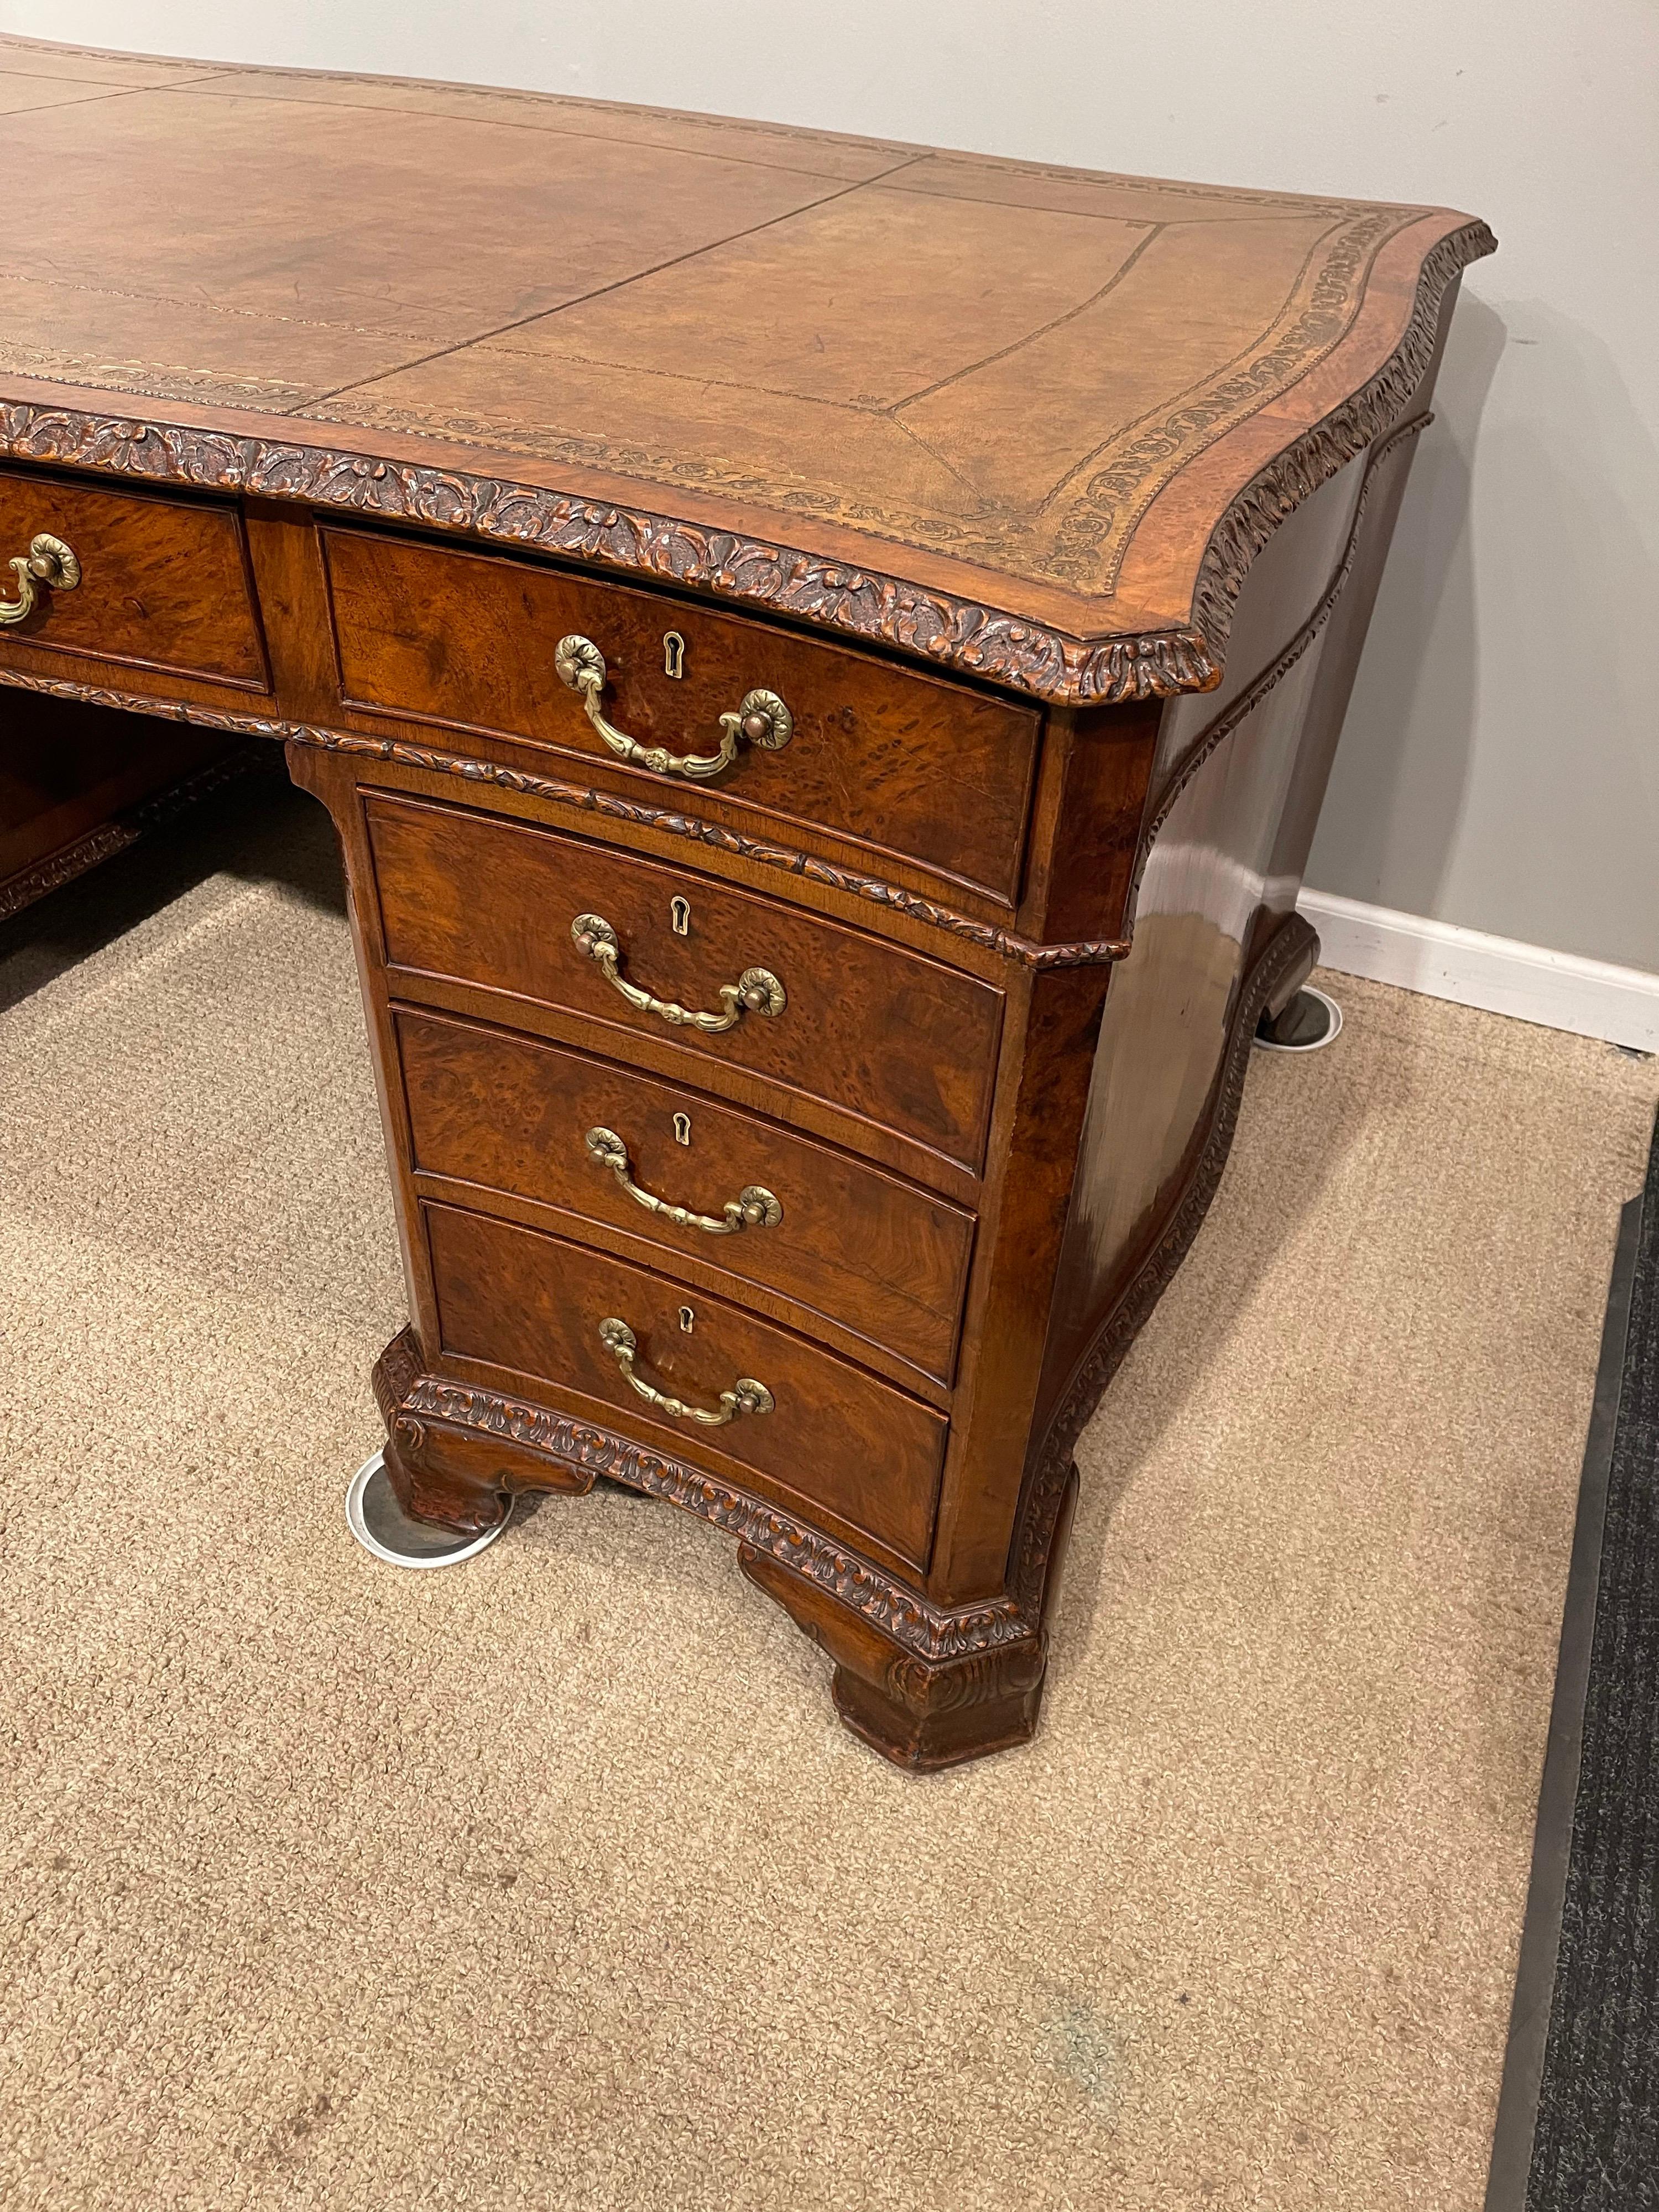 Early Victorian Burl Walnut 2 Pedestal Desk
With Cigar box mahogany drawers & brass hardware 
With 3 keys. Also comes with later glass top